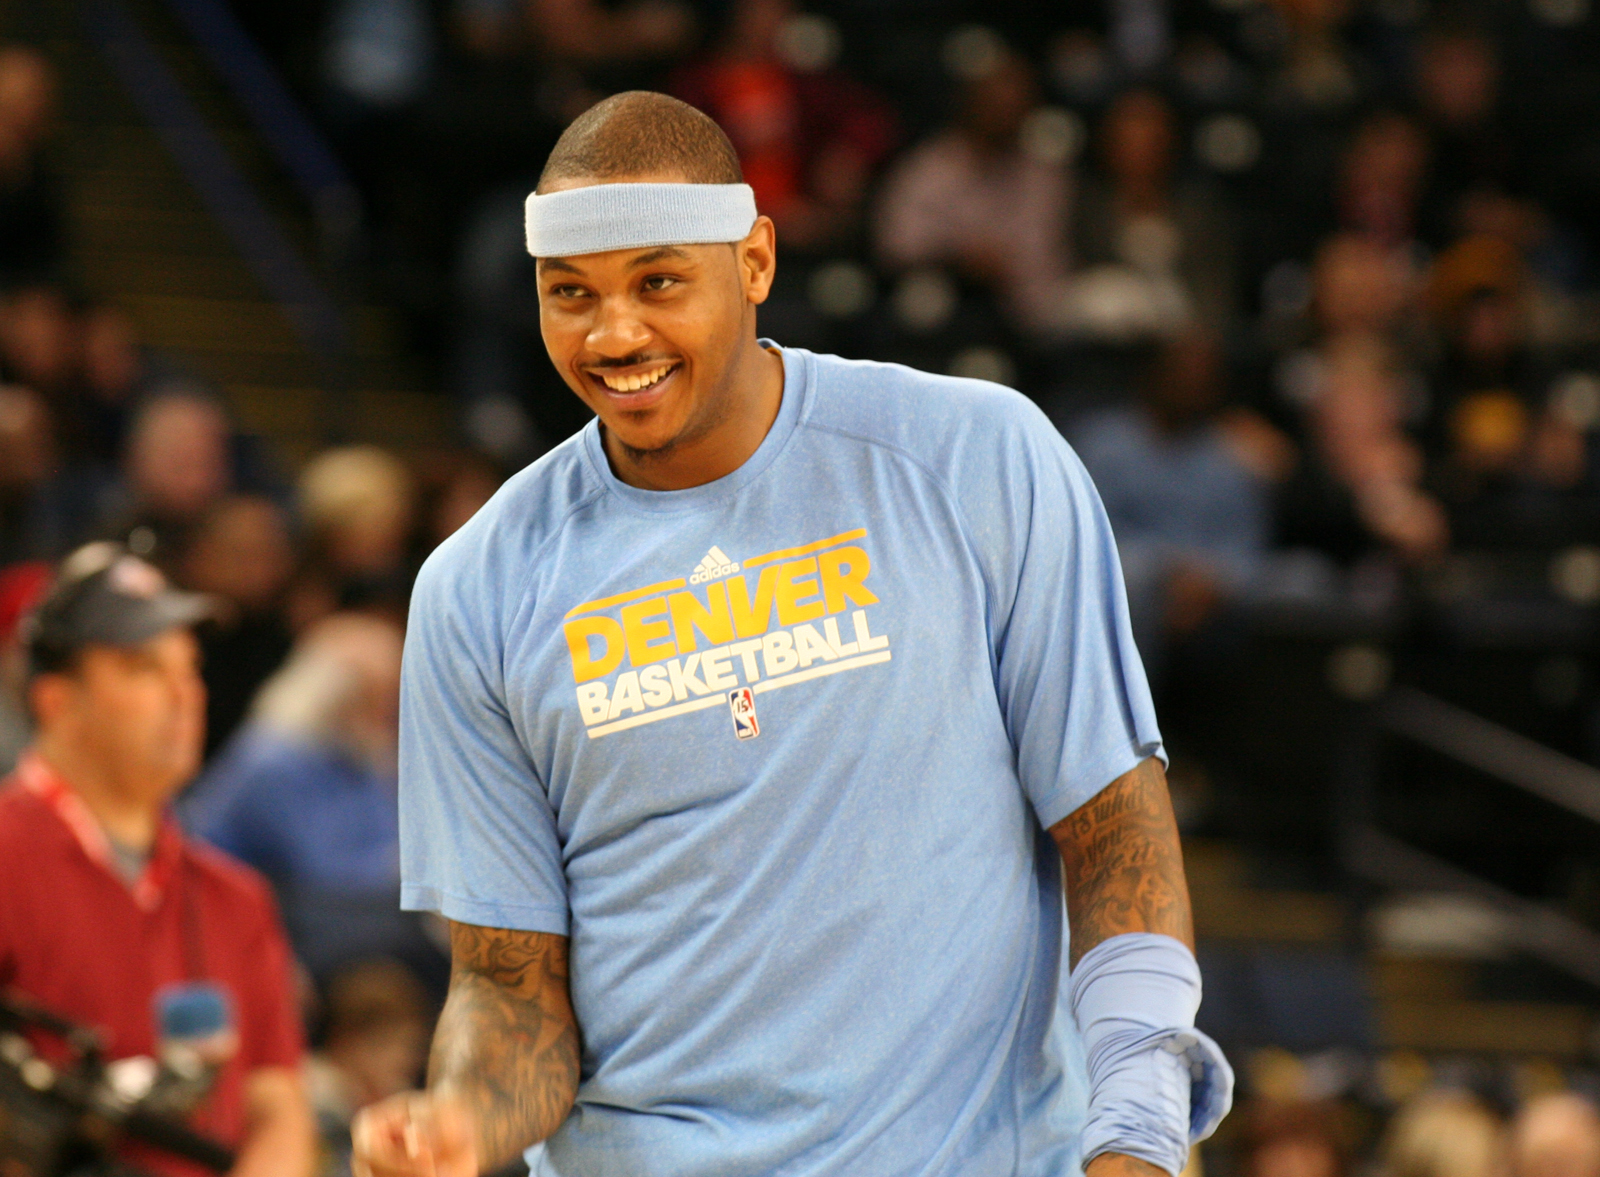 carmelo anthony nuggets